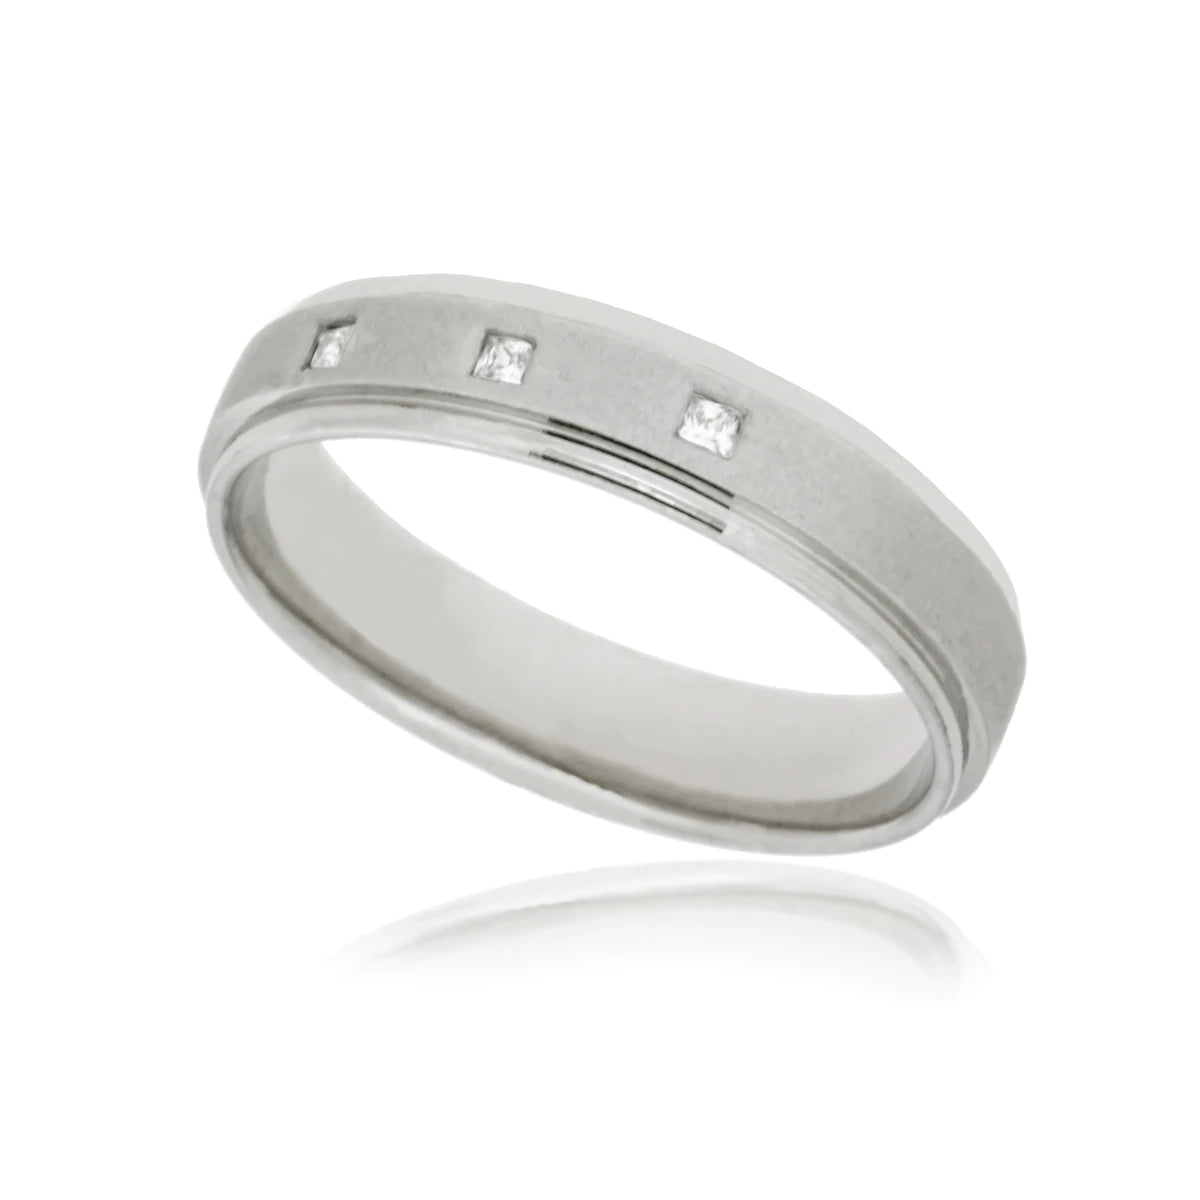 Men's Wedding Bands: The Complete Guide